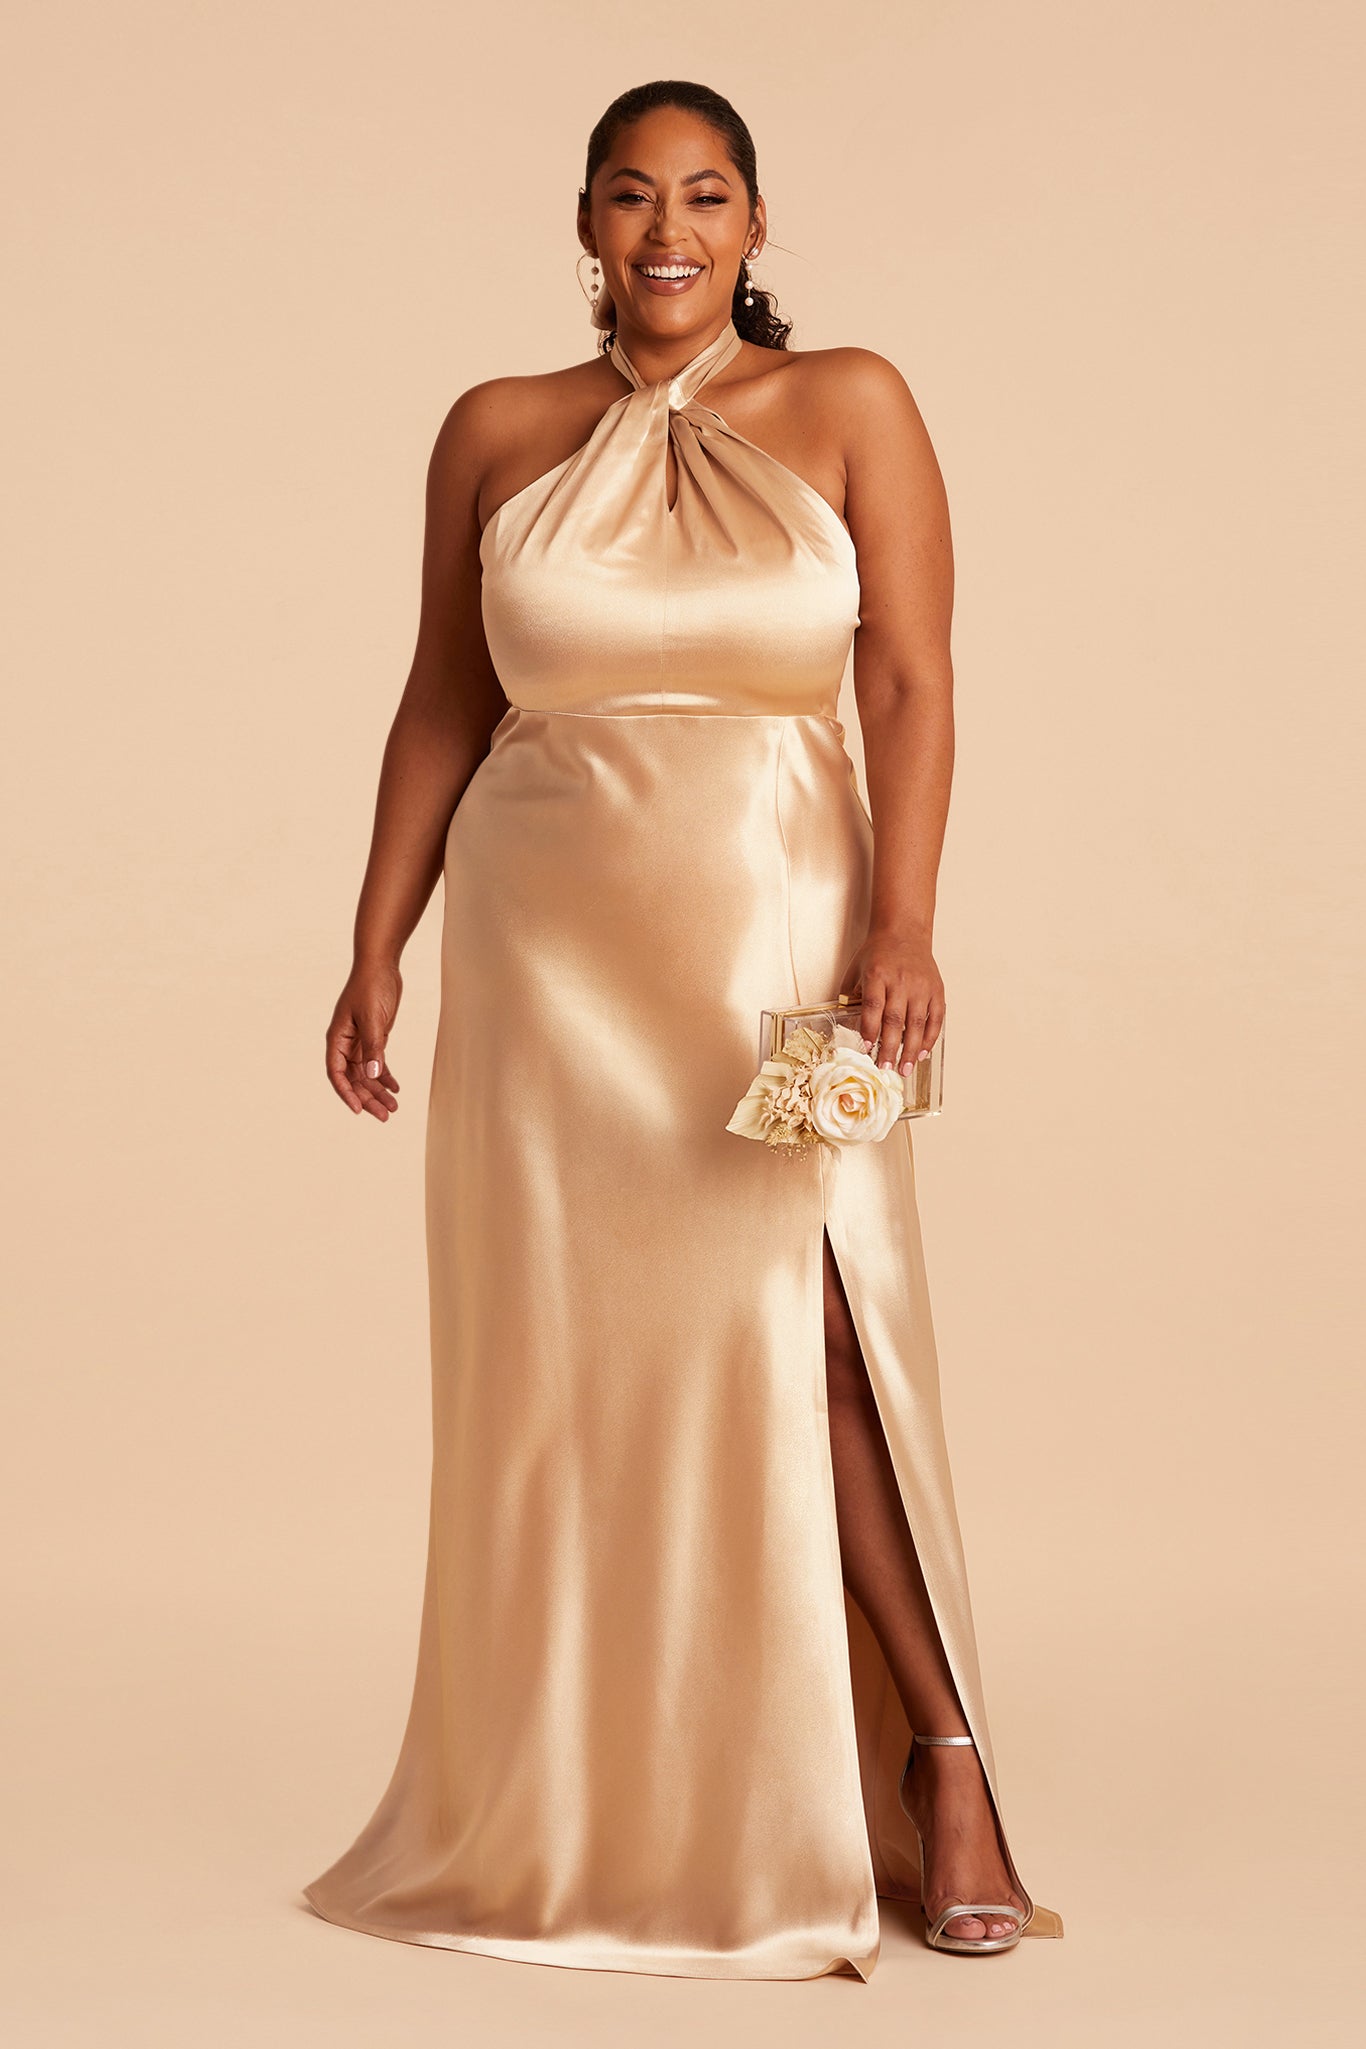 Monica Satin Dress Curve dress in gold satin by Birdy Grey, front view